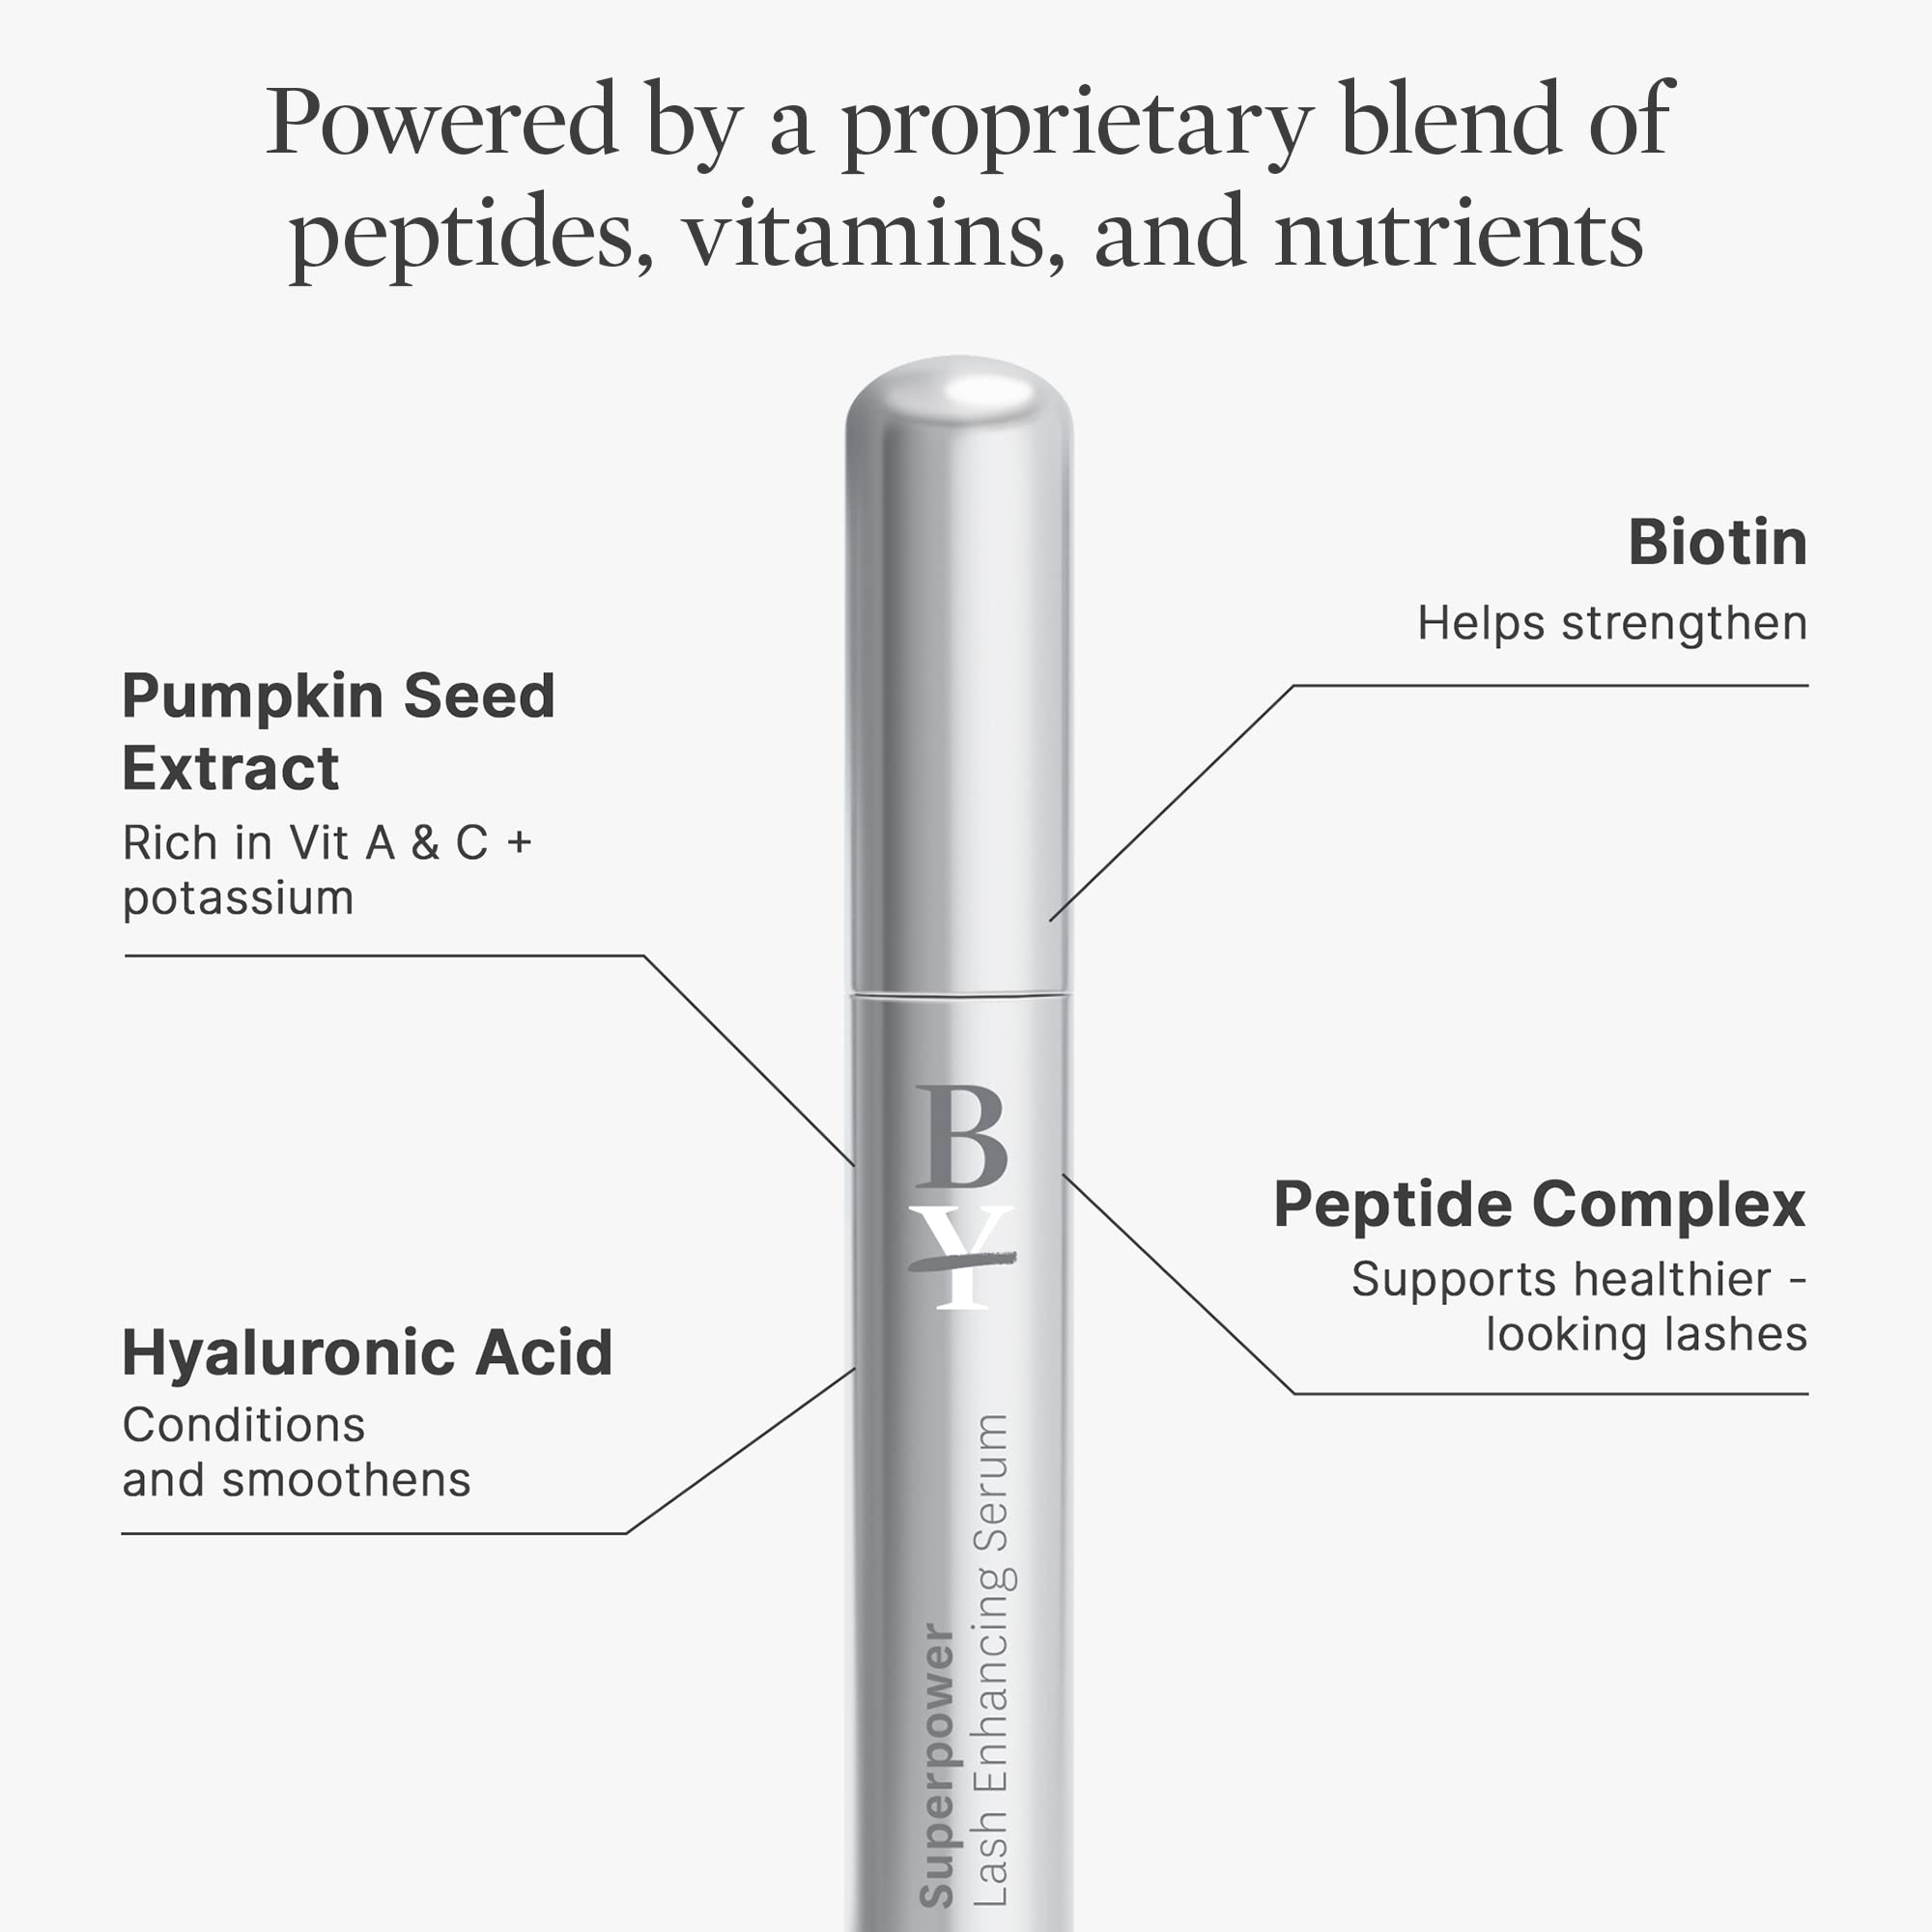 Better Not Younger Superpower Lash Serum (7ml) Lash Conditioner with Peptides, Vitamins & Nutrients - Lash Enhancing Serum for Thicker, Fuller and Longer Lashes - Cruelty-Free Eyelash Serum